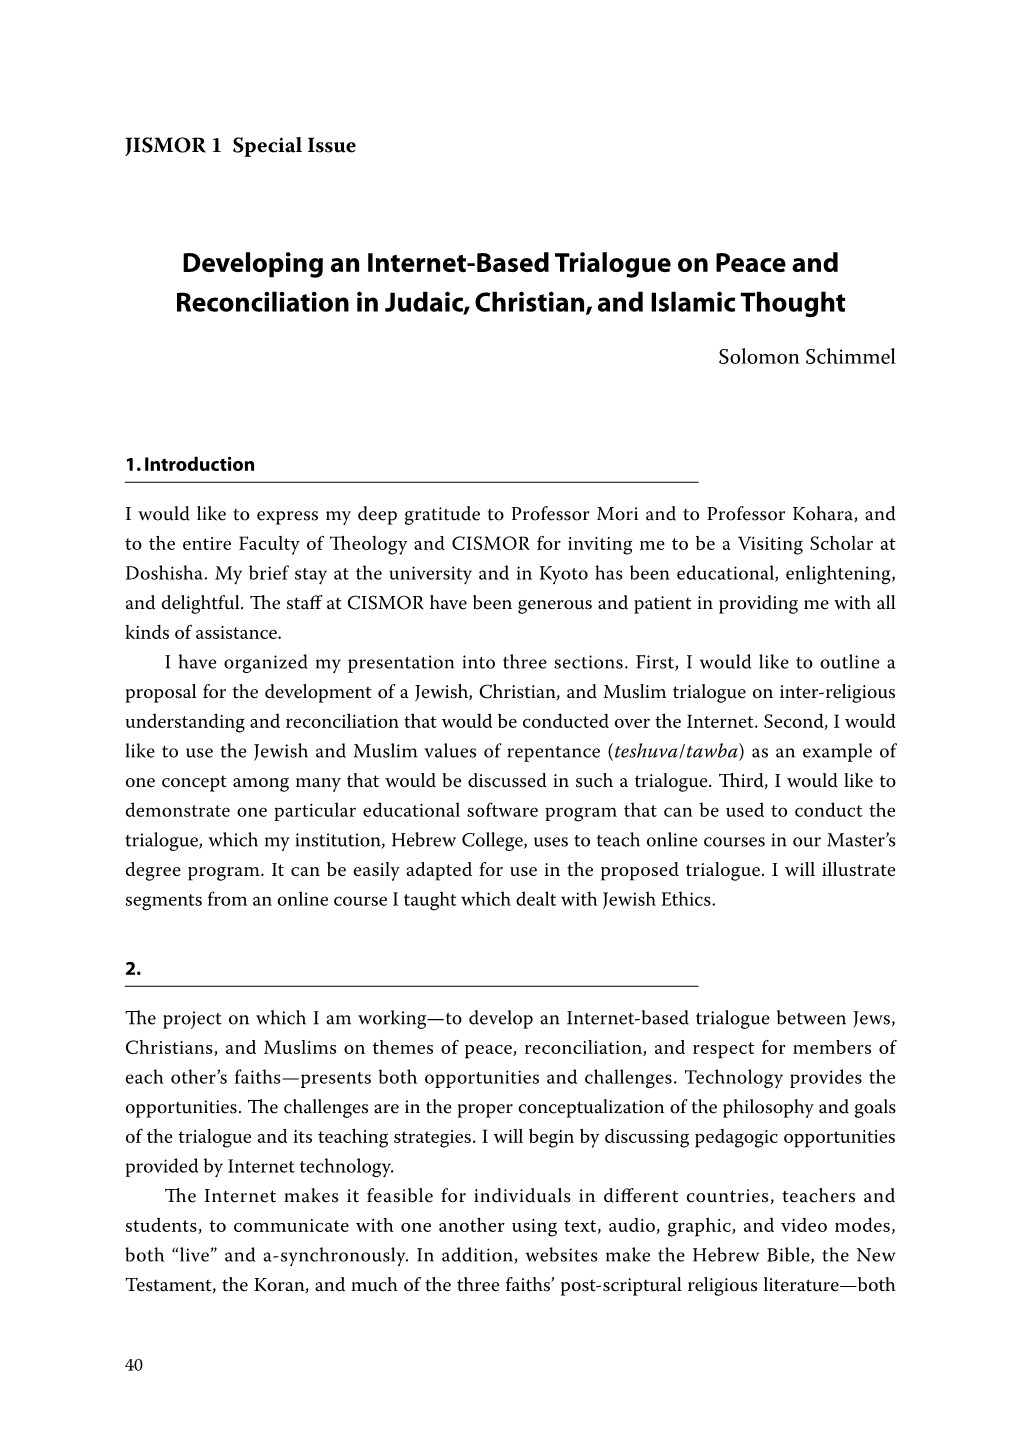 Developing an Internet-Based Trialogue on Peace and Reconciliation in Judaic, Christian, and Islamic Thought